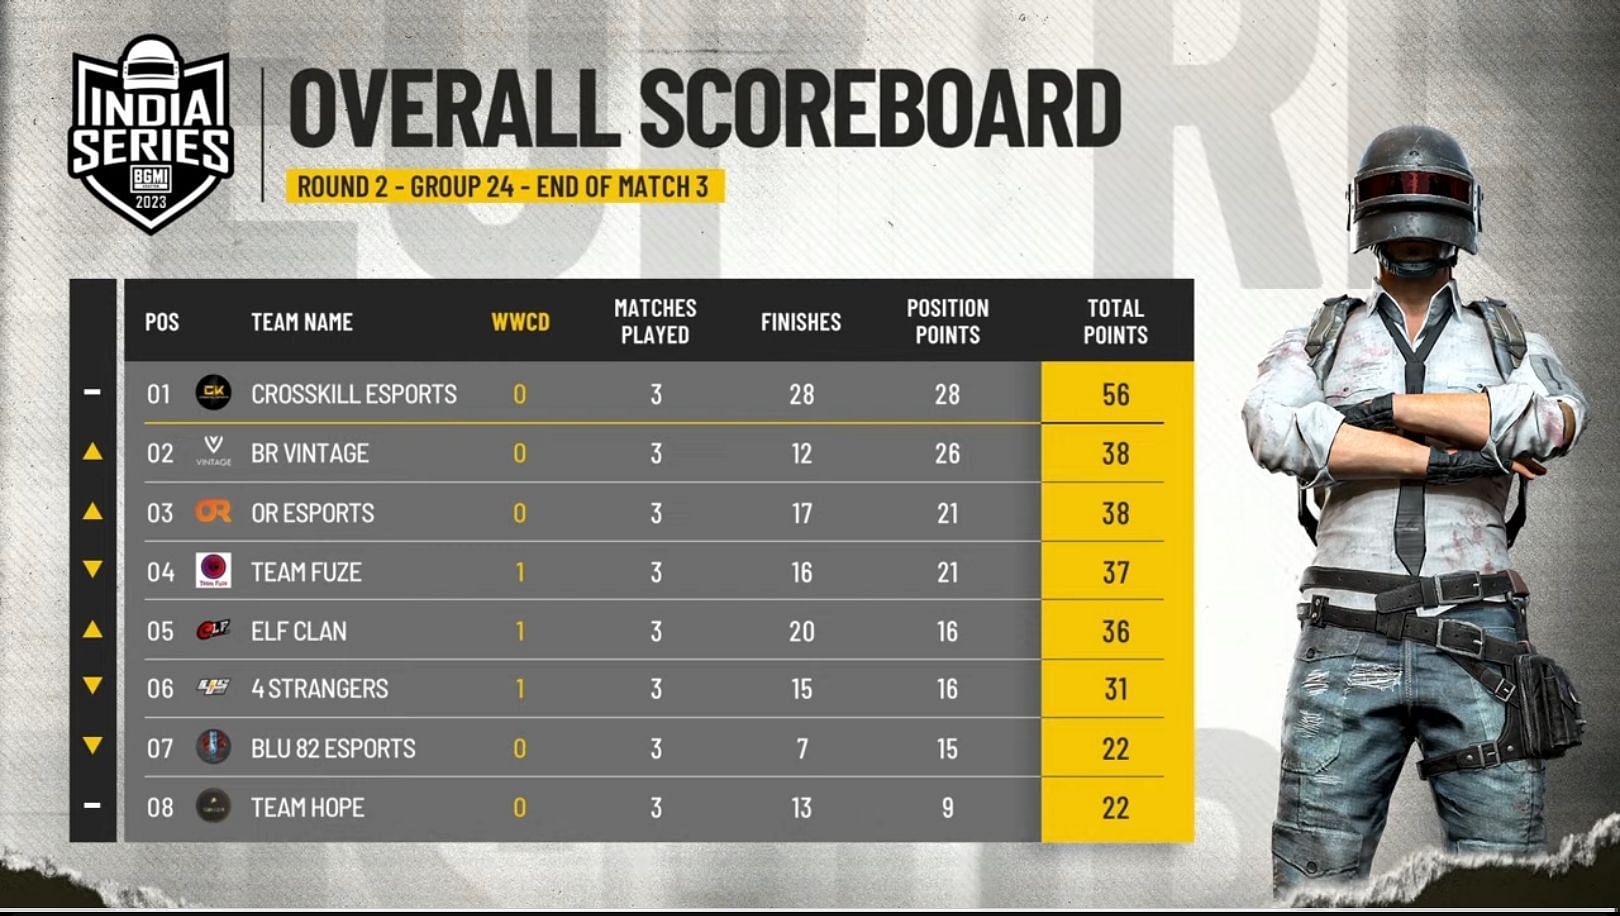 OR Esports secured third spot after their three matches (Image via BGMI)